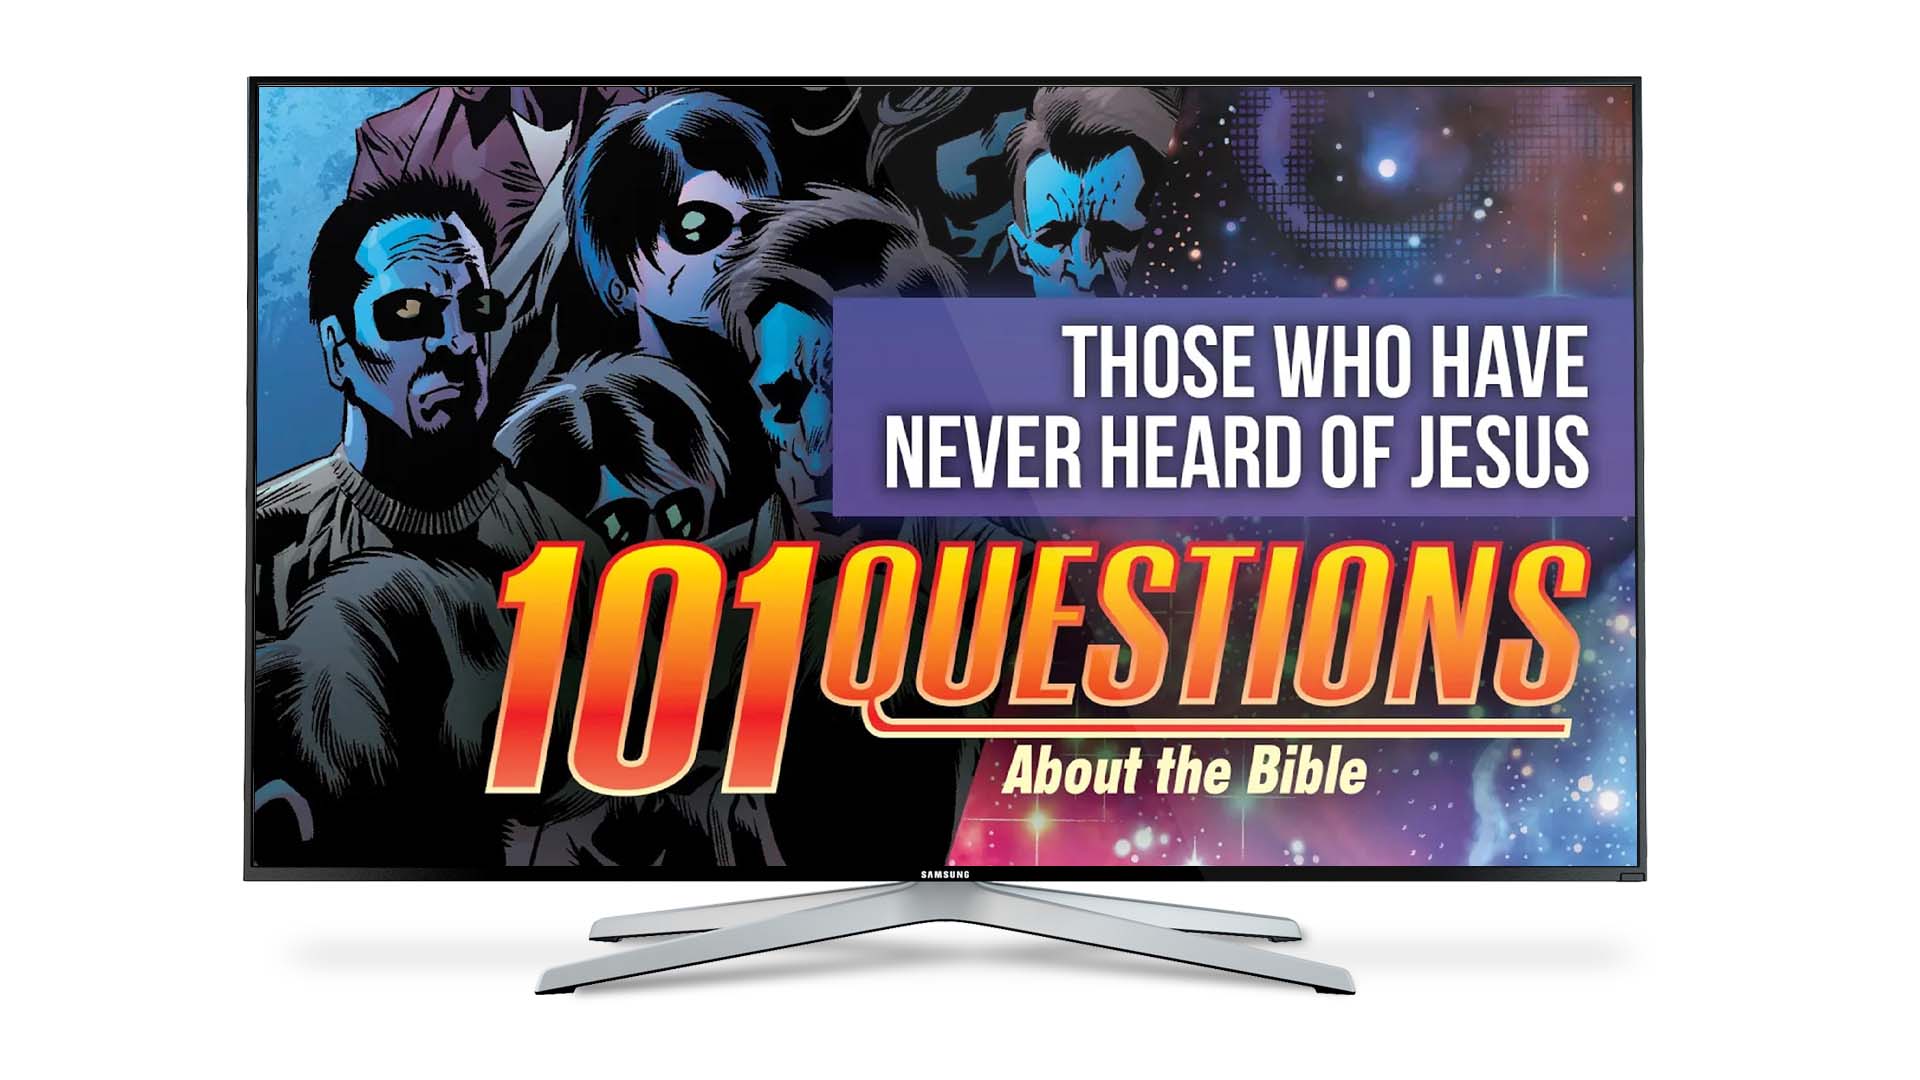 Motion Comic: 101 Questions #6 - What happens to those who have never heard about Jesus?